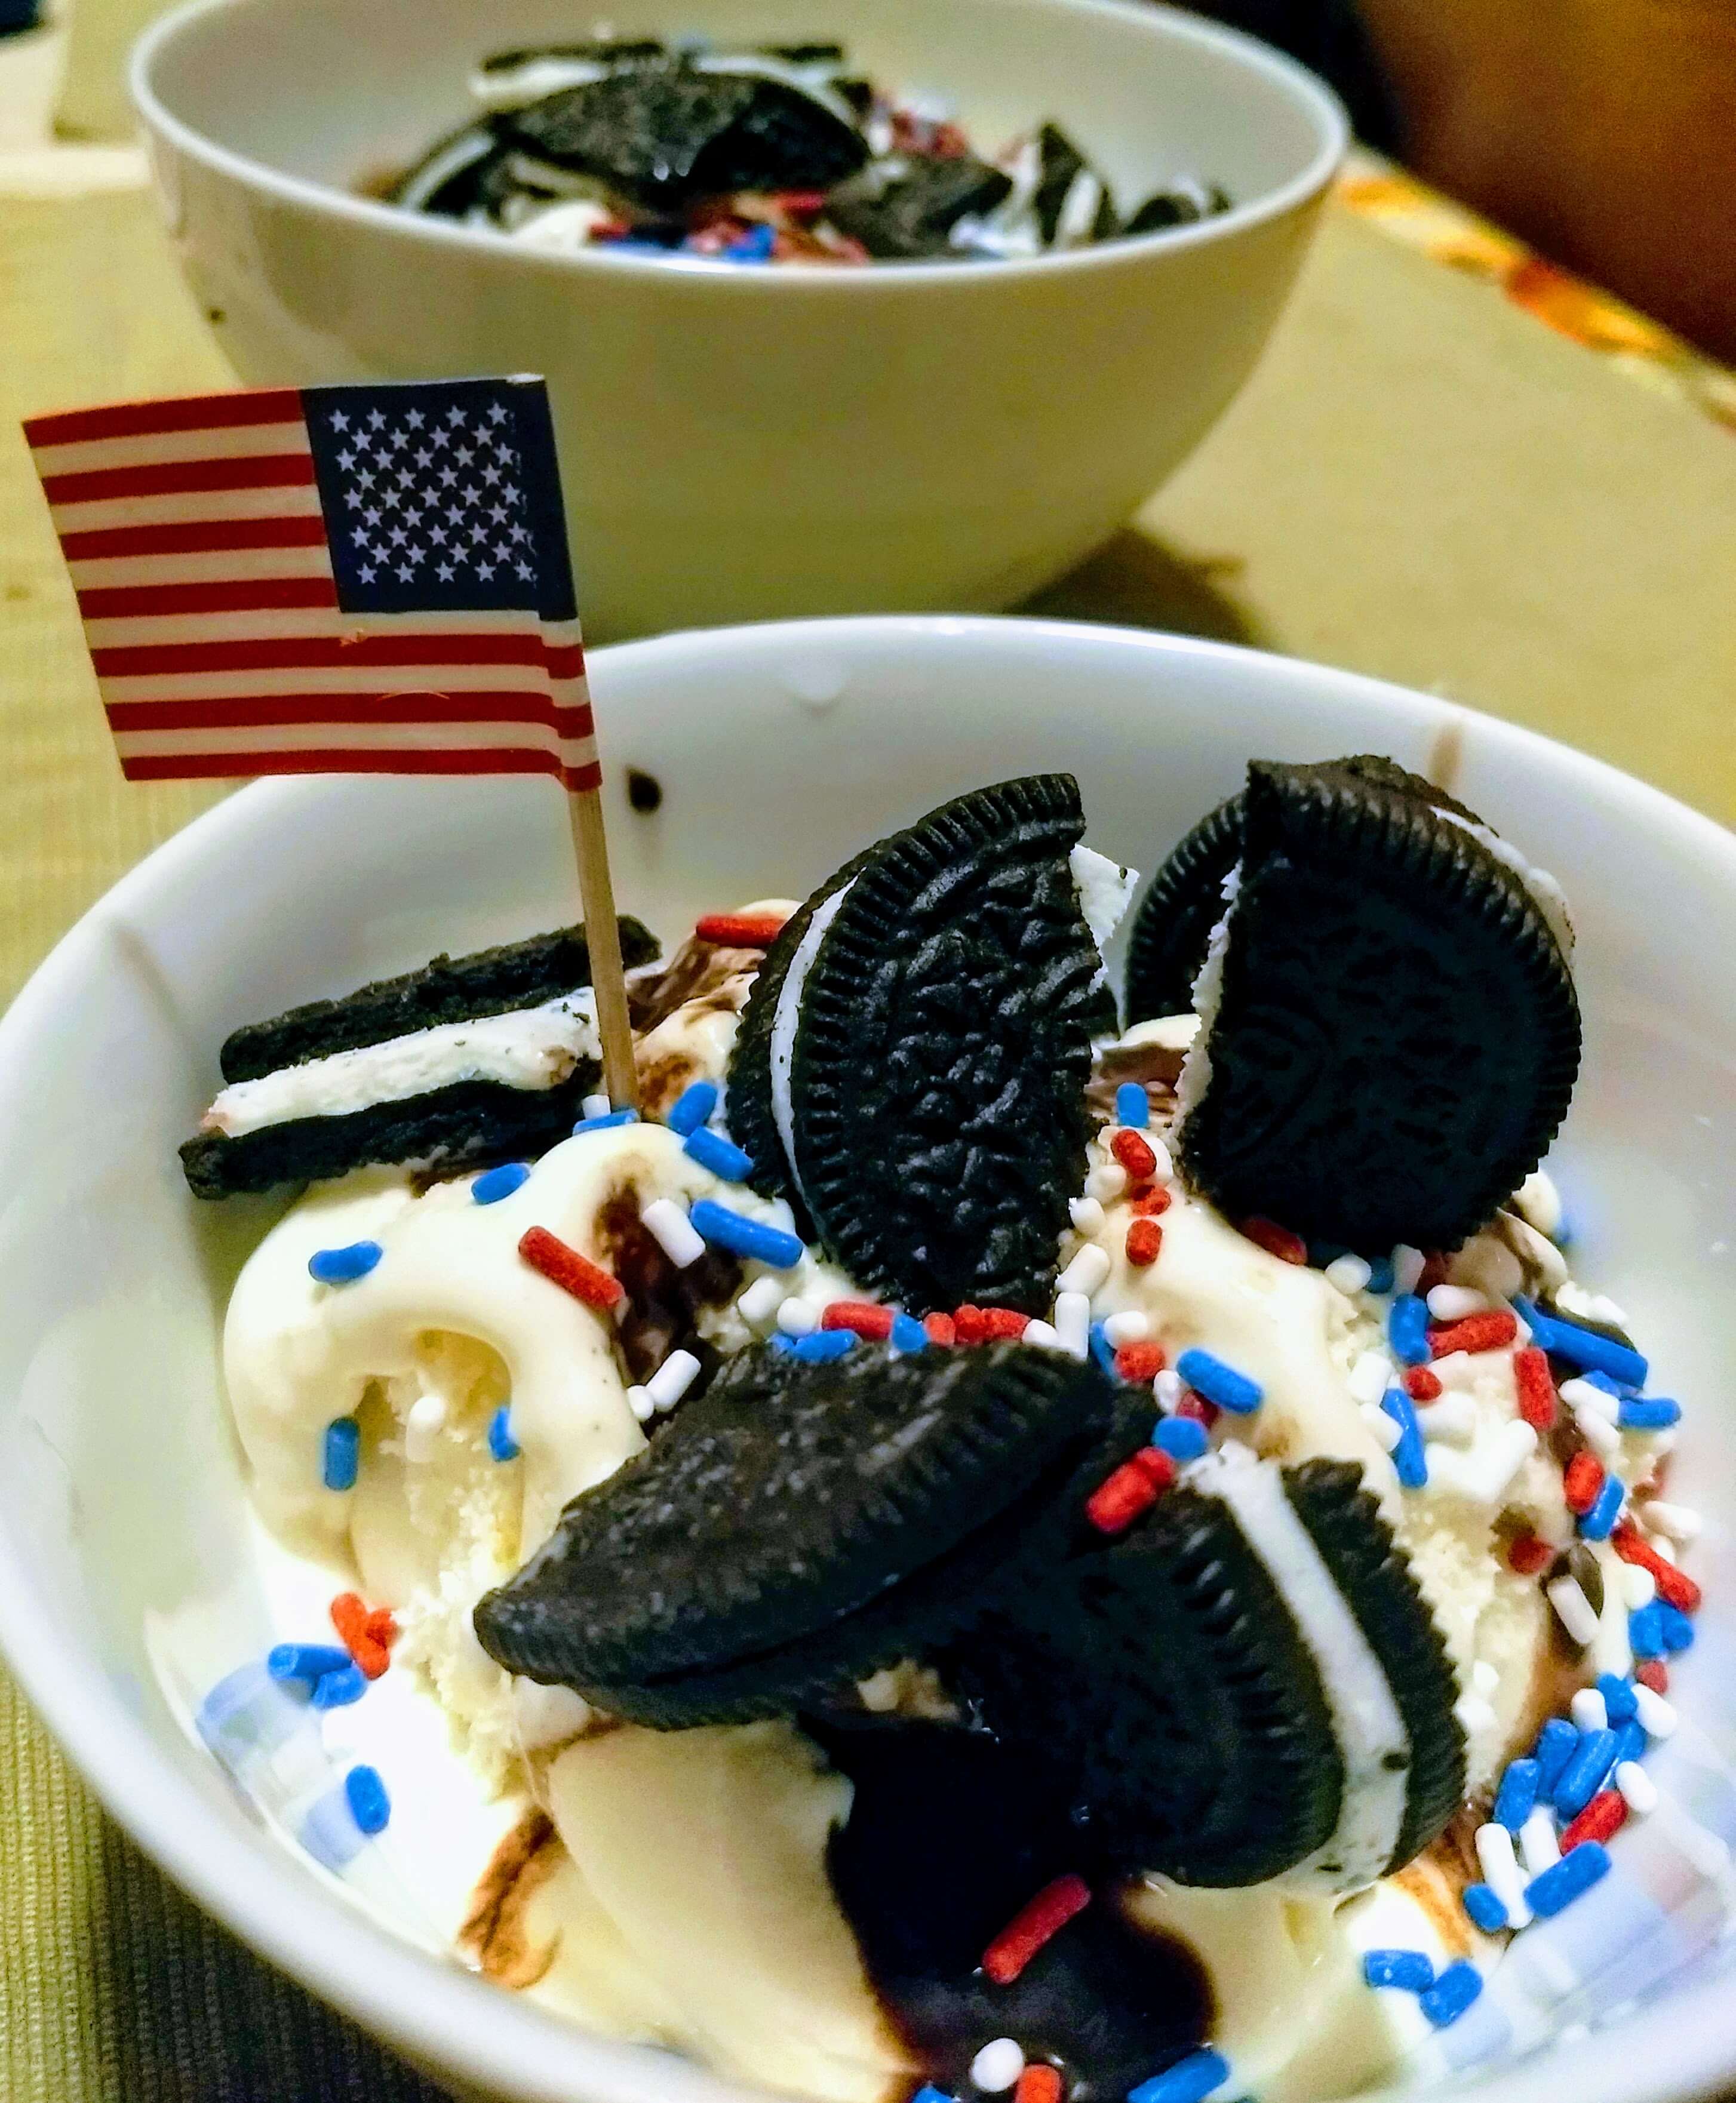 an ice cream sundae with crushed oreos, vanilla ice cream, red white and blue sprinkles and an American flag toothpick decor